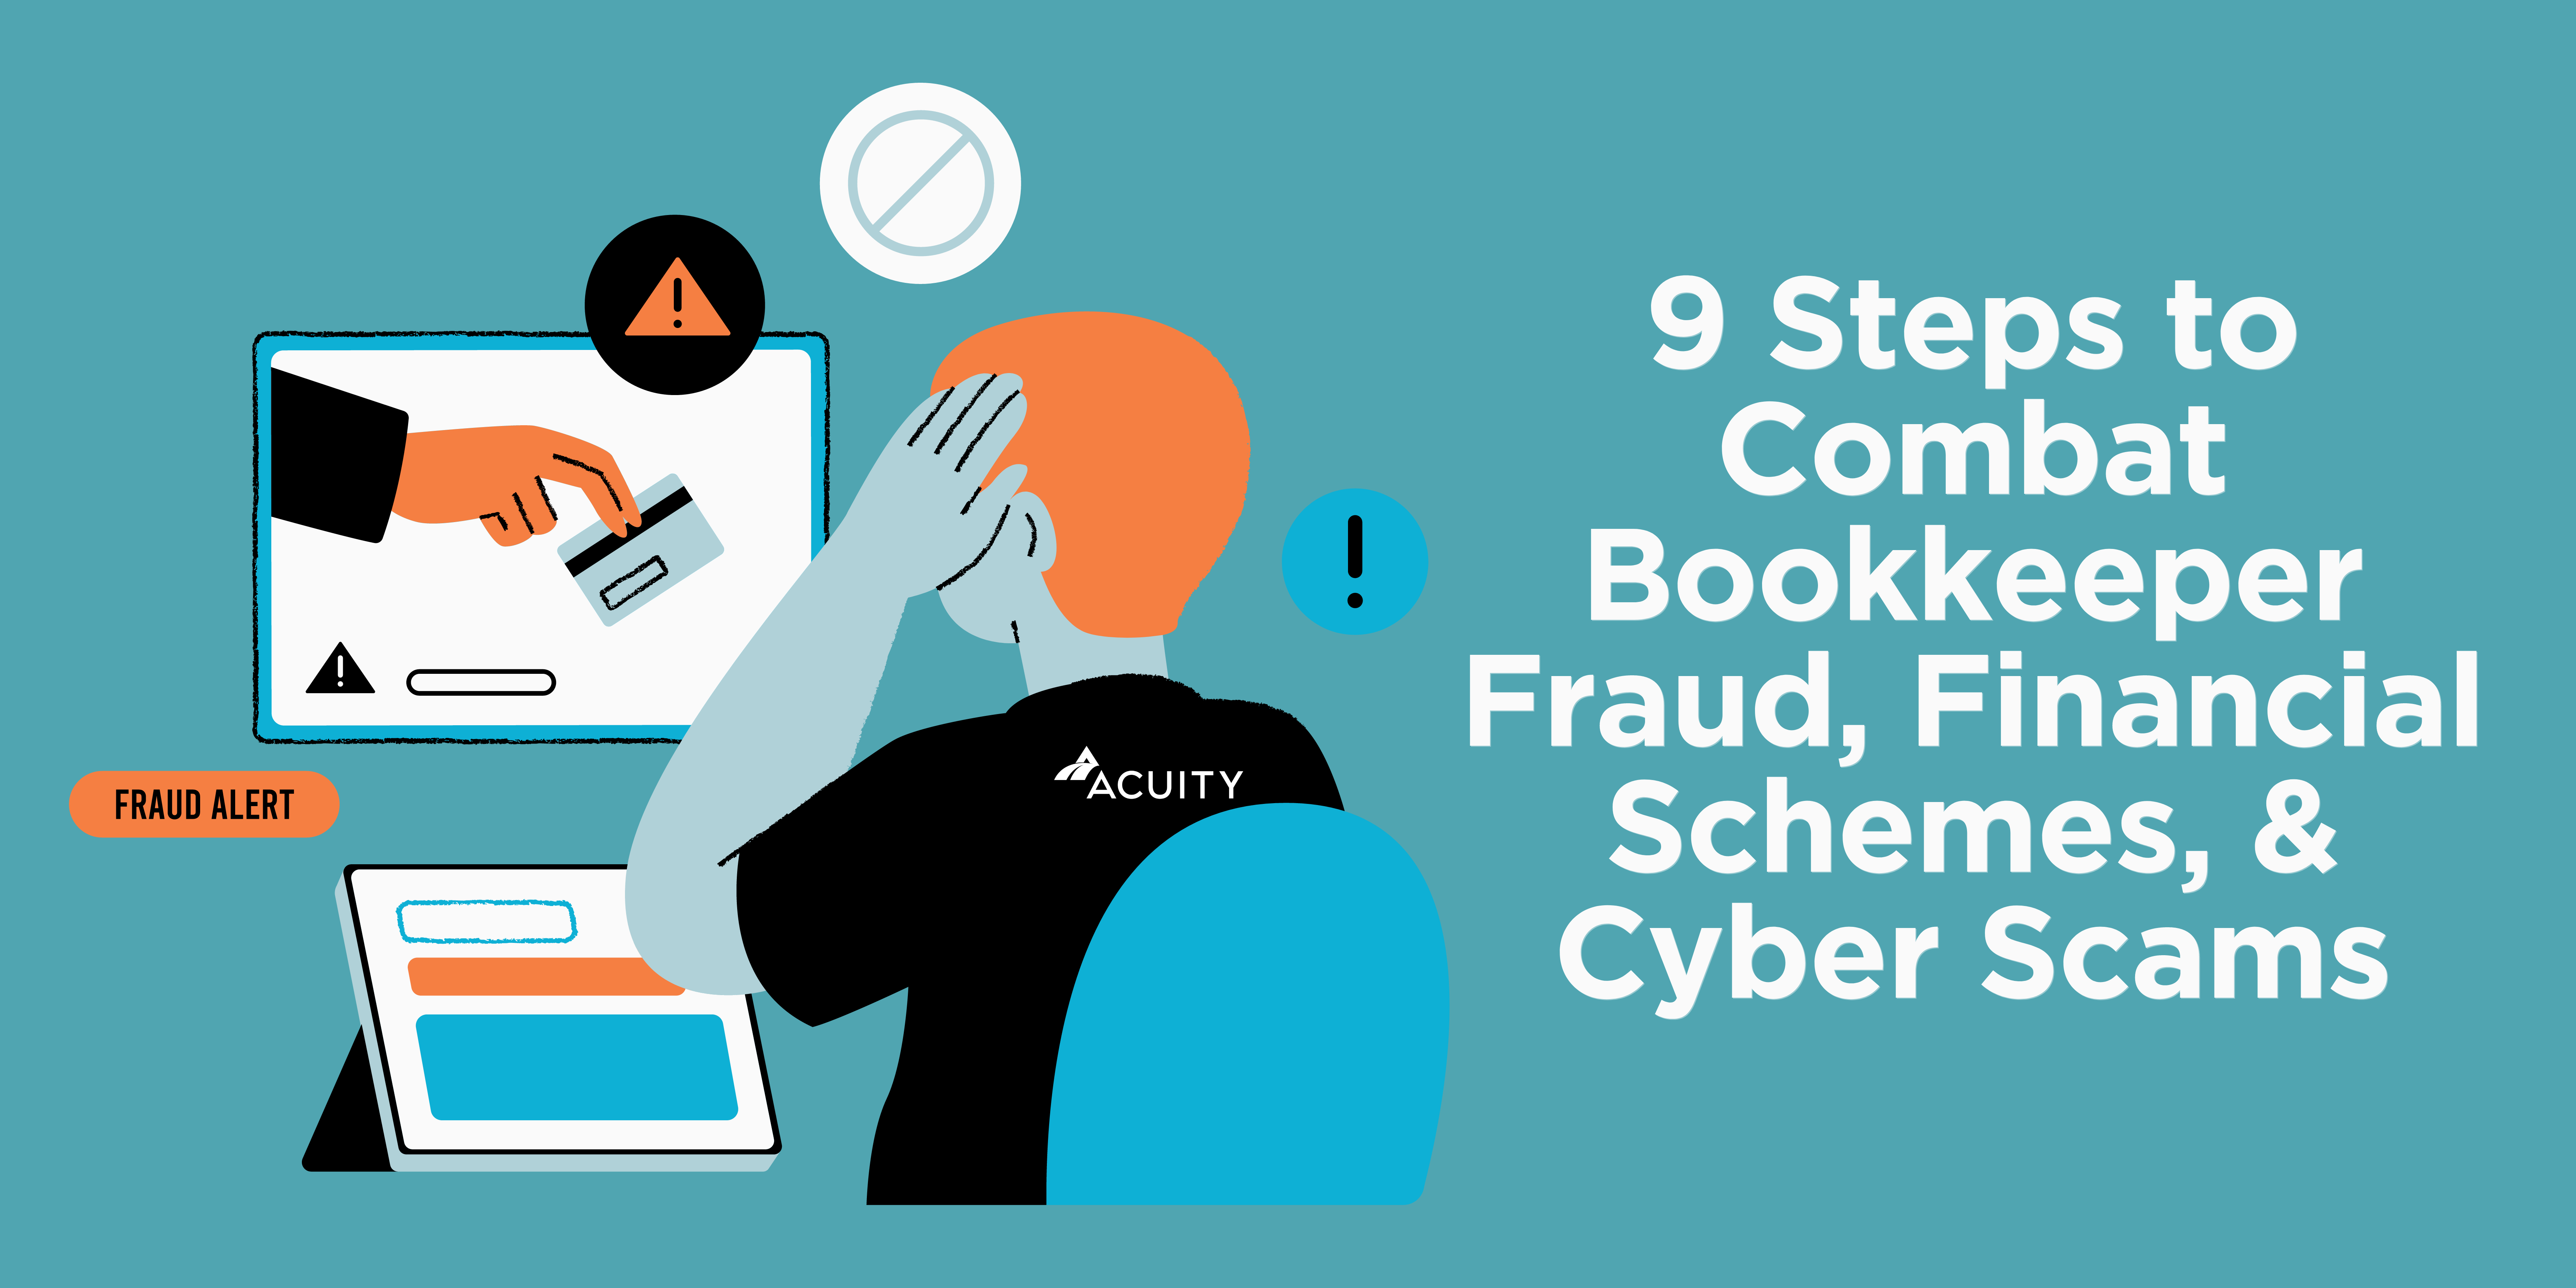 9 Steps for Fraud Prevention: How Entrepreneurs Can Combat Bookkeeper Fraud, Financial Schemes, and Cyber Scams